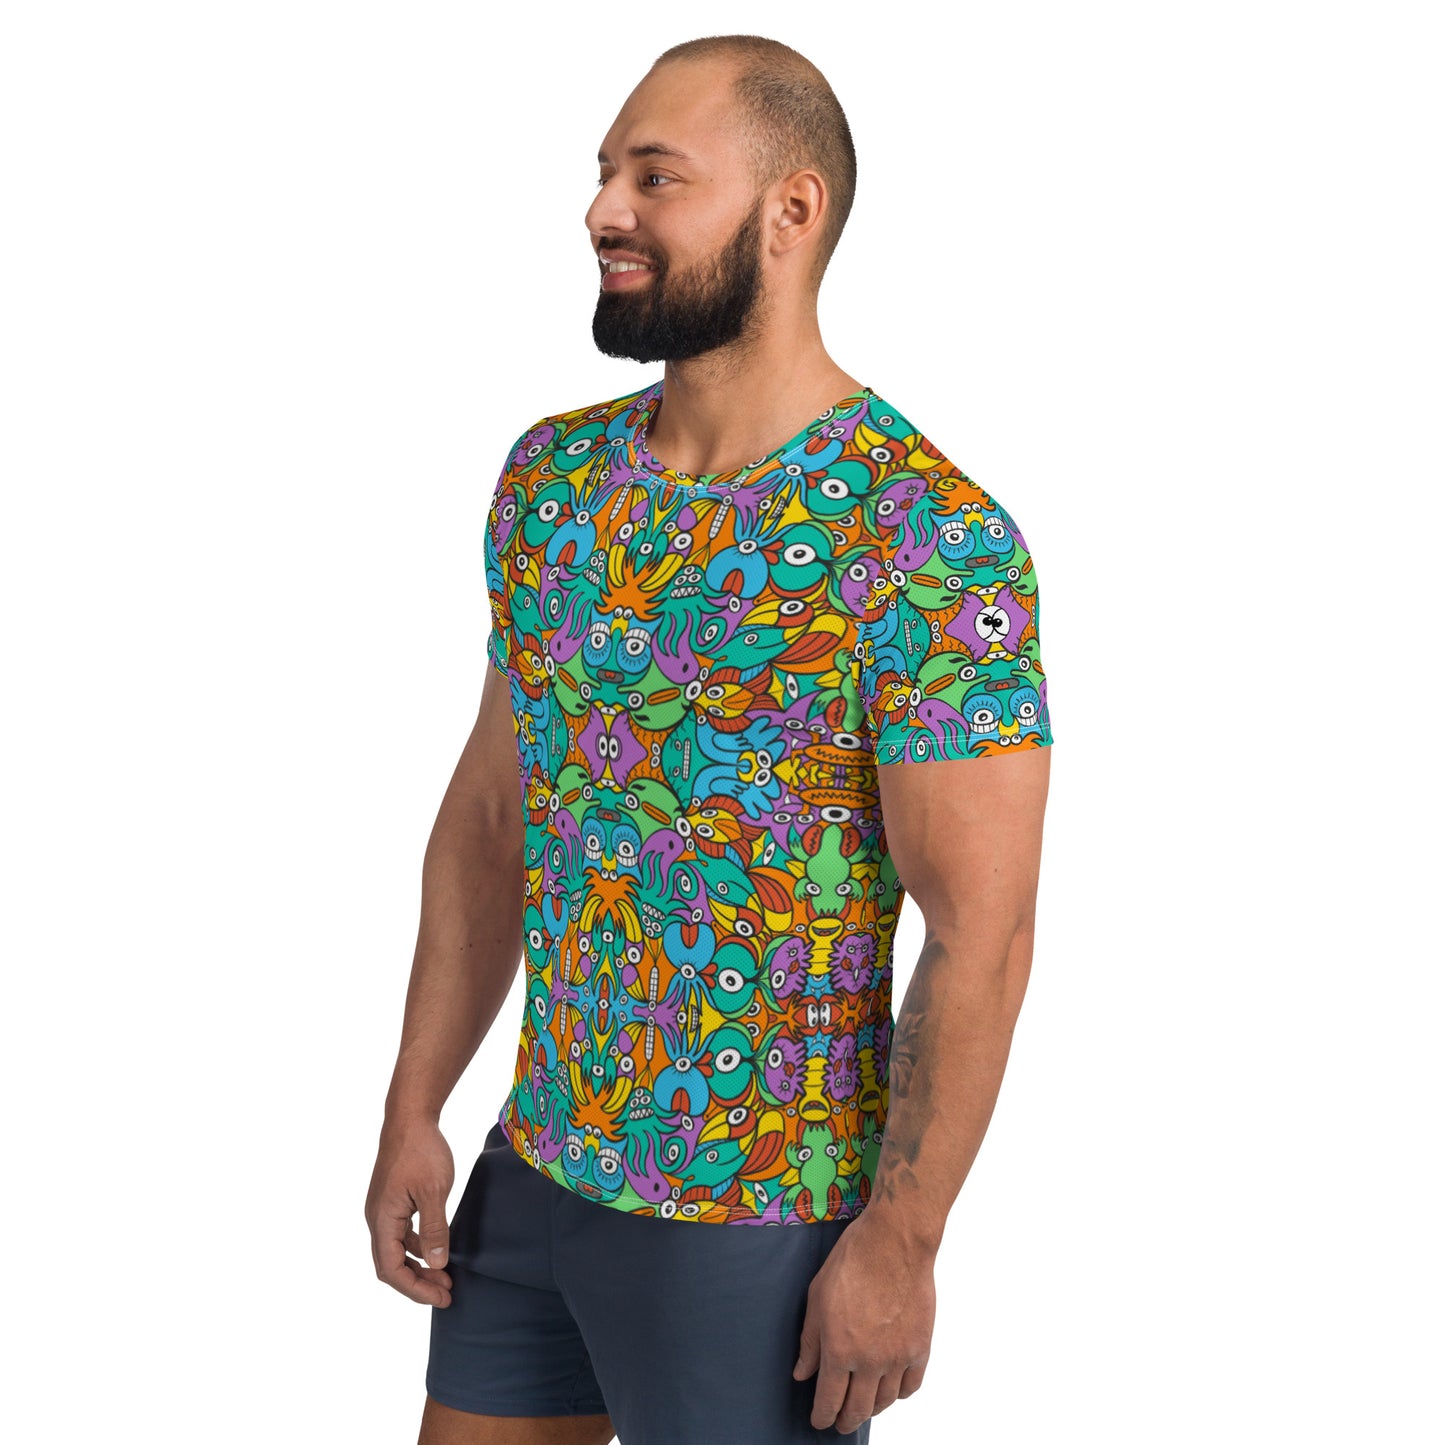 Fantastic doodle world full of weird creatures All-Over Print Men's Athletic T-shirt. Side view